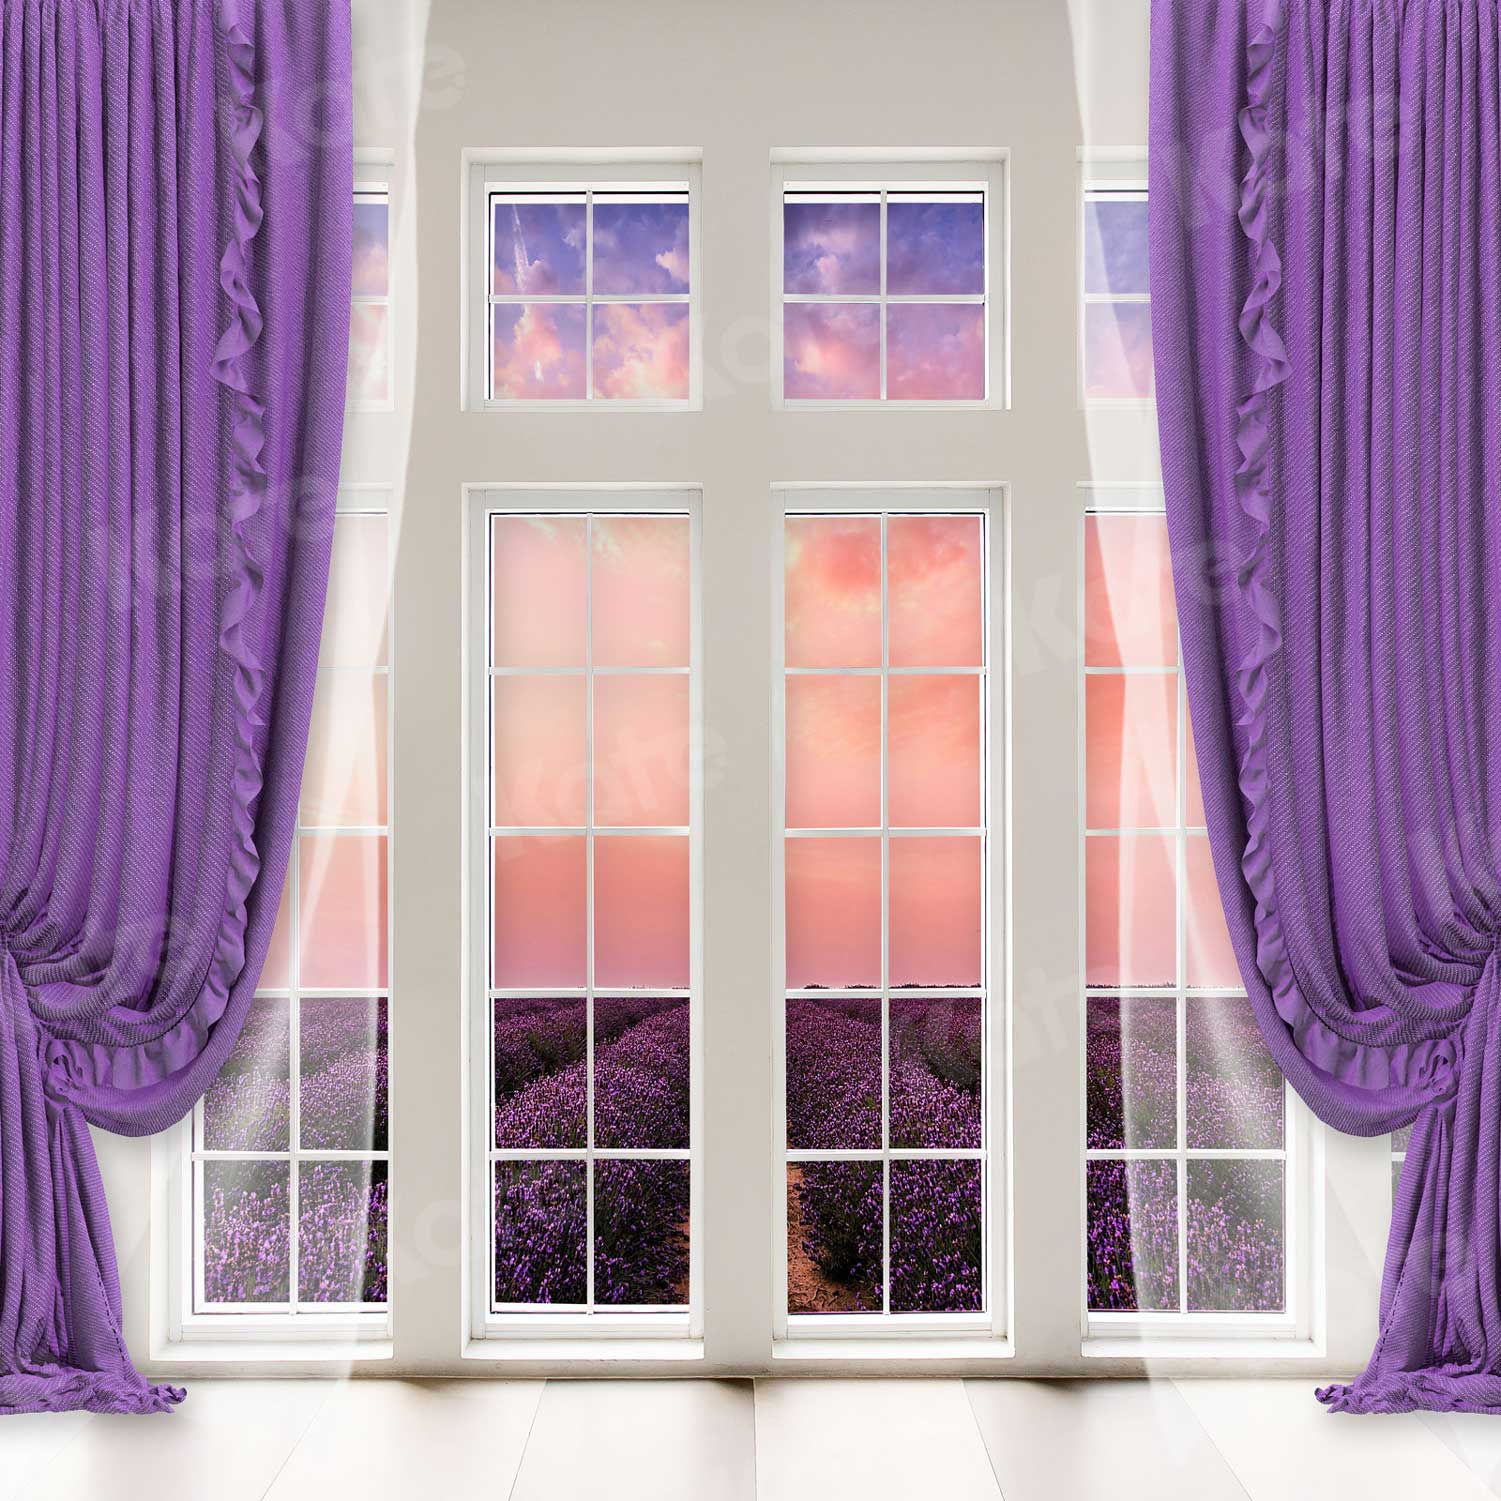 Kate Window Purple Curtain Lavender Backdrop for Photography